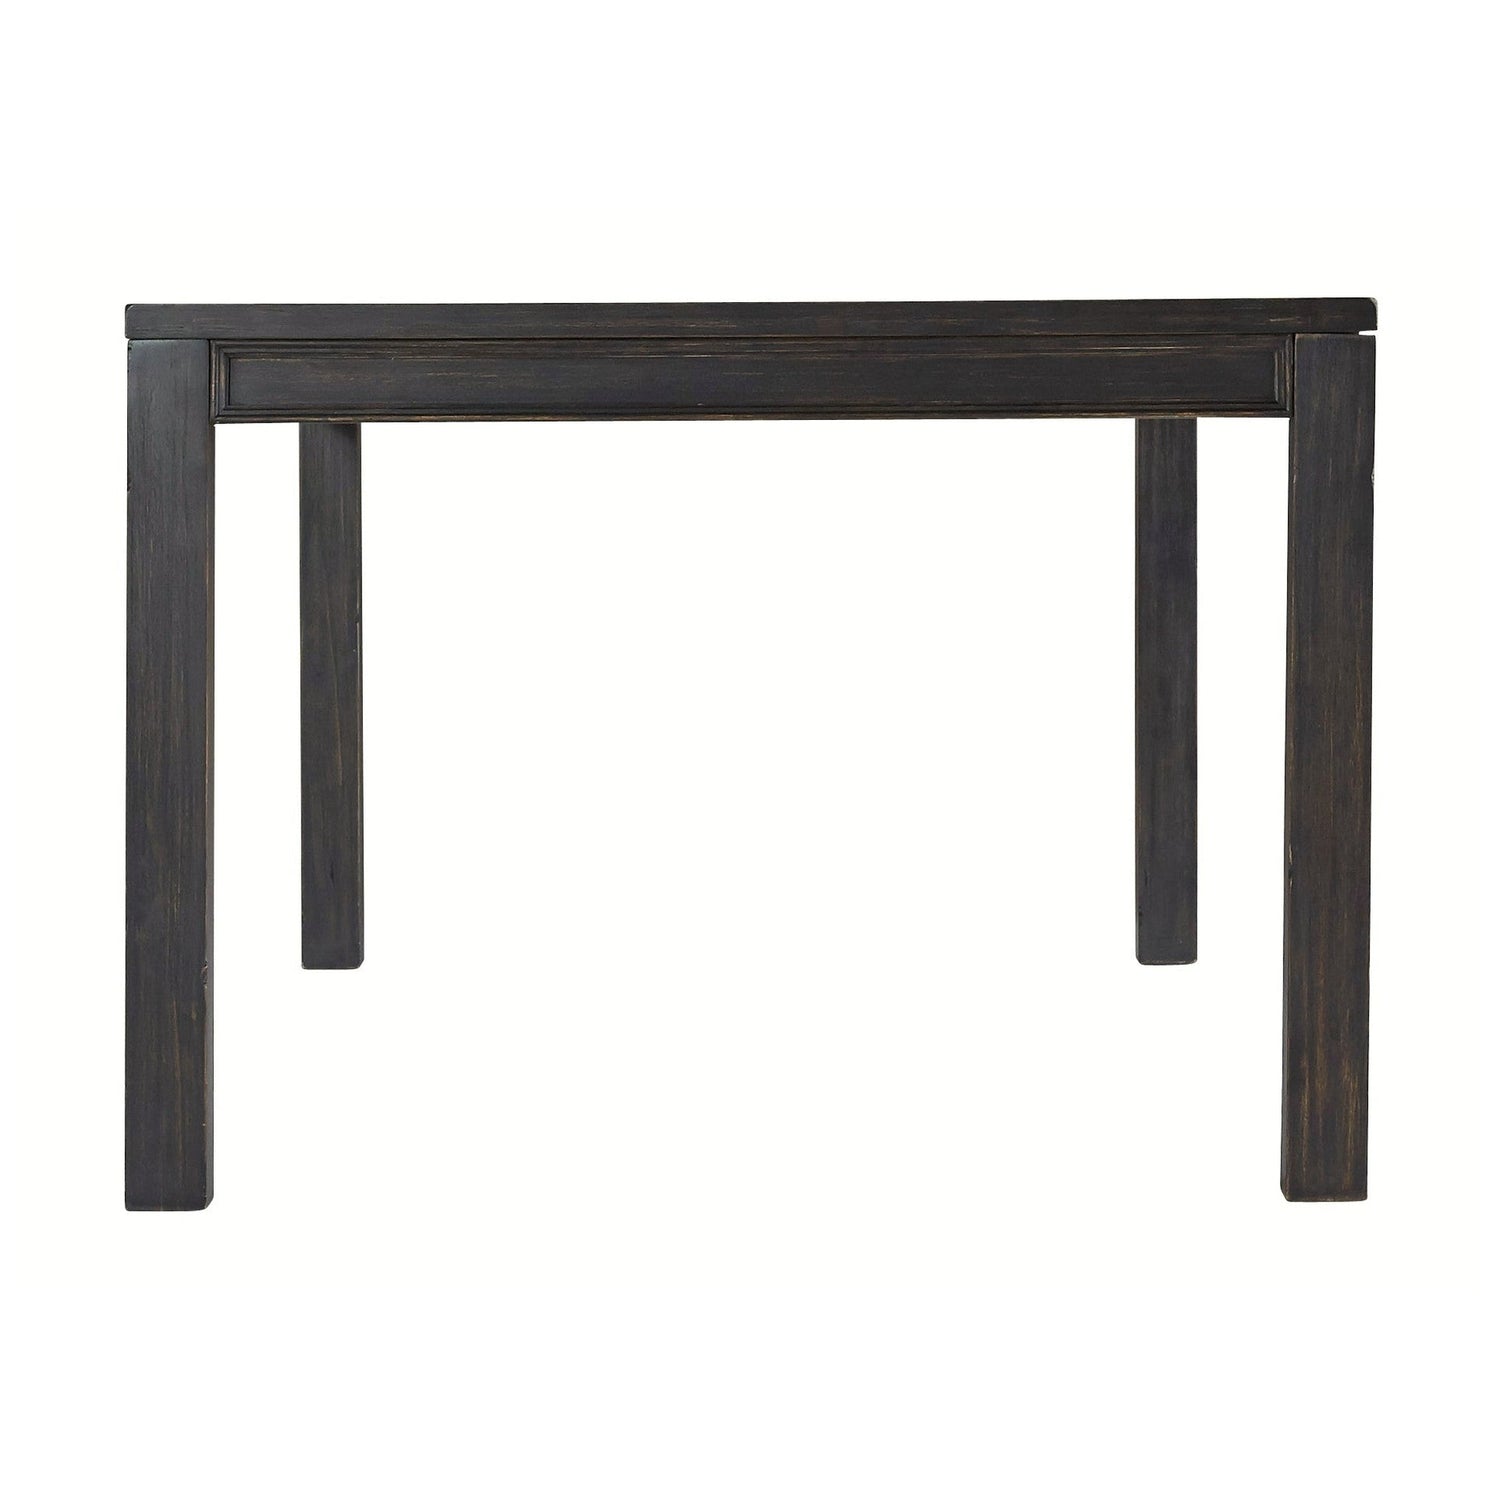 Jeanette Dining Table with 4 Chairs Ash-D702D1